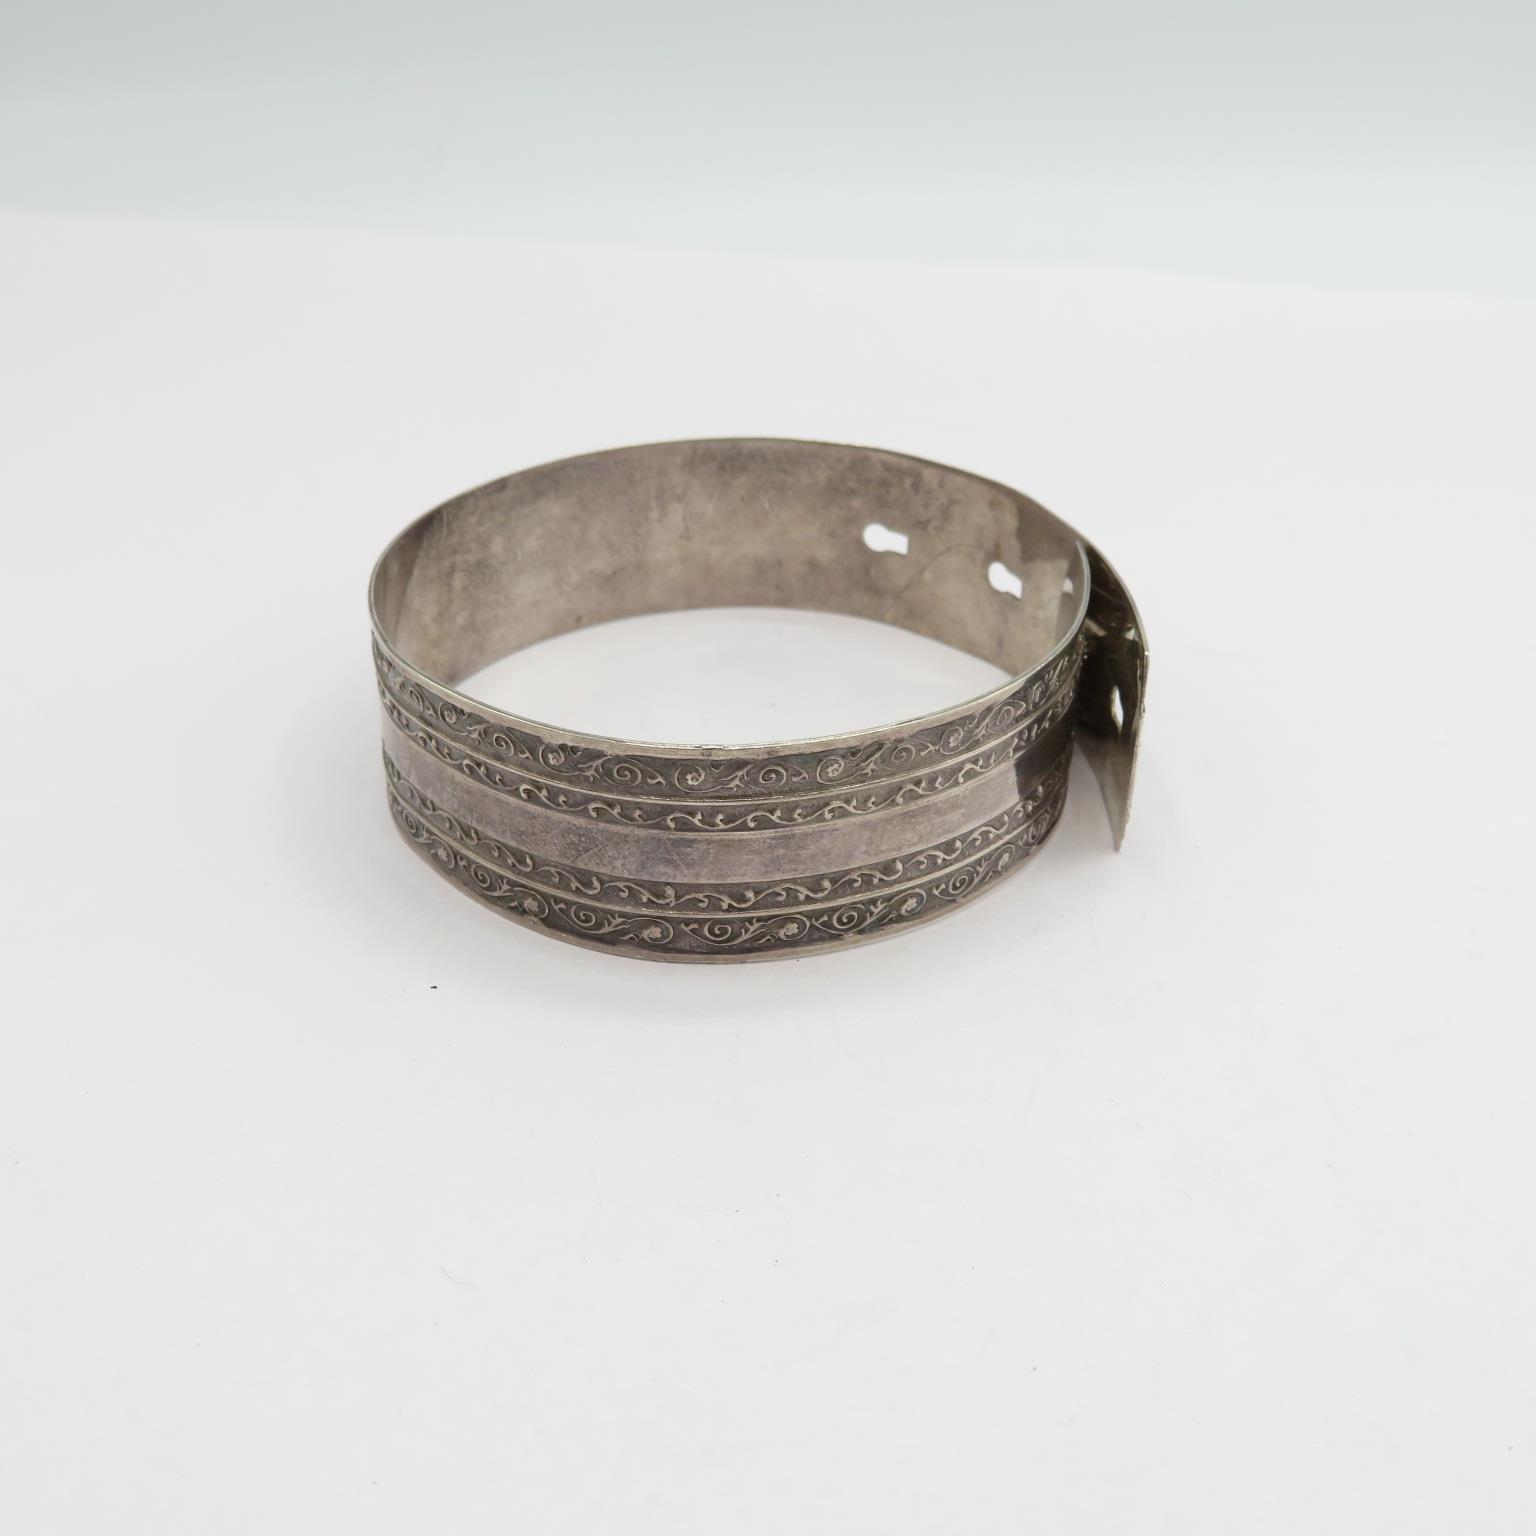 A pair of car collar bracelets 925 silver 40.5g - Image 2 of 6